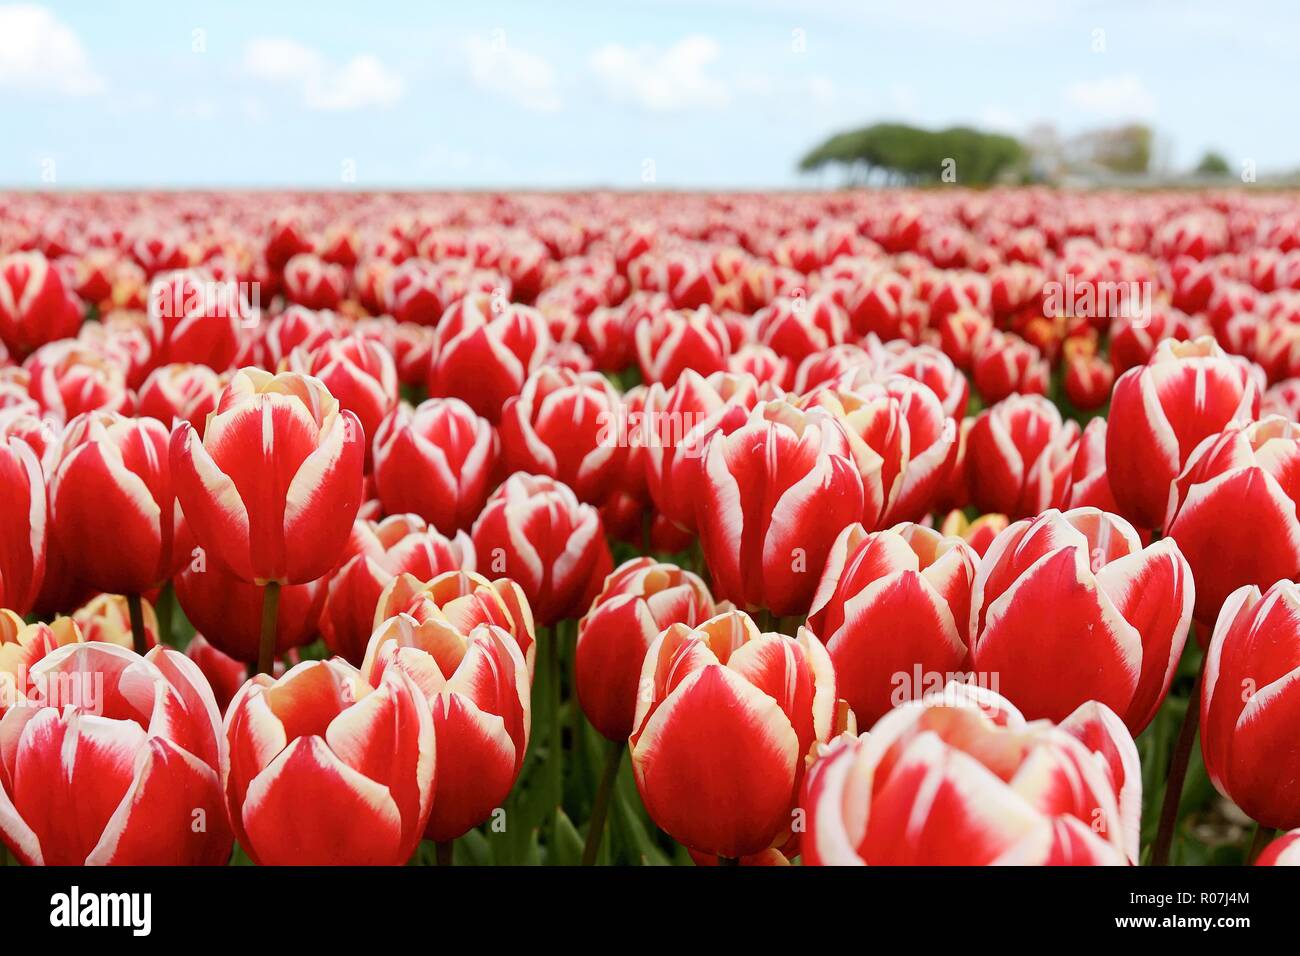 Close-up of a field of red and white tulips in The Netherlands under a blue sky with clouds in spring Stock Photo